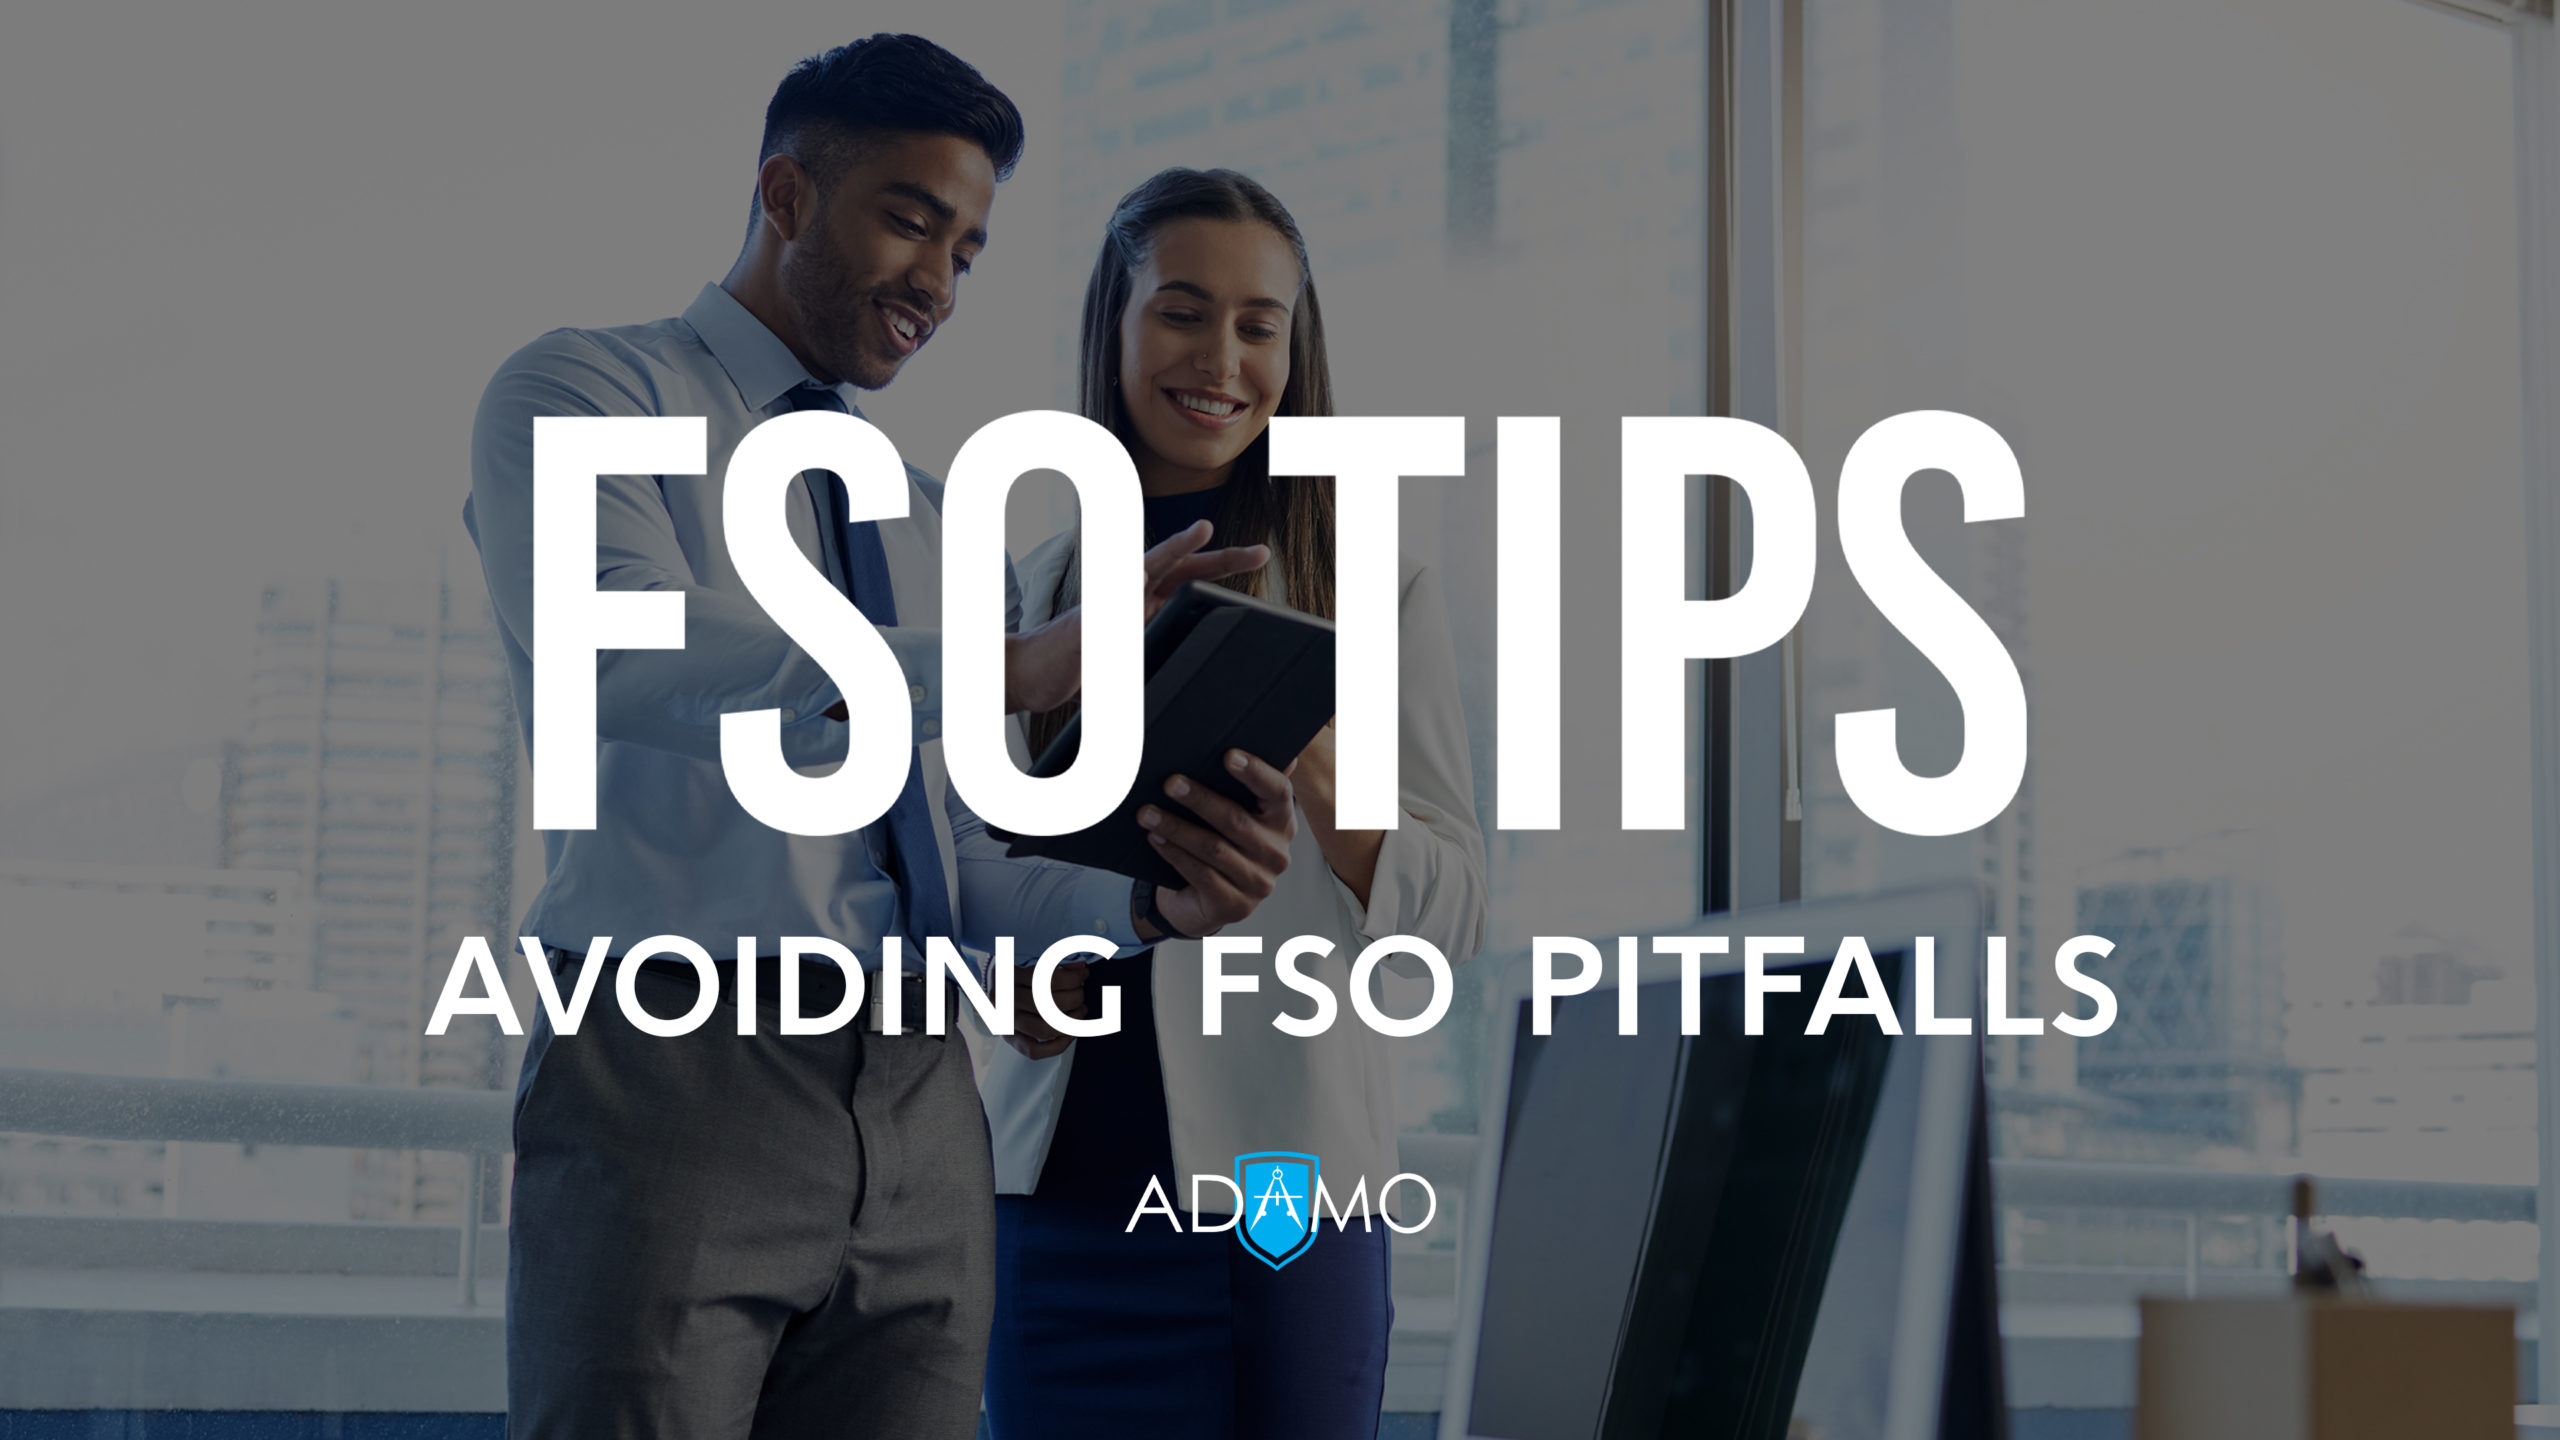 Text "FSO Tips Avoiding FSO Pitfalls" on top of an image of two people in business clothes looking over a journal